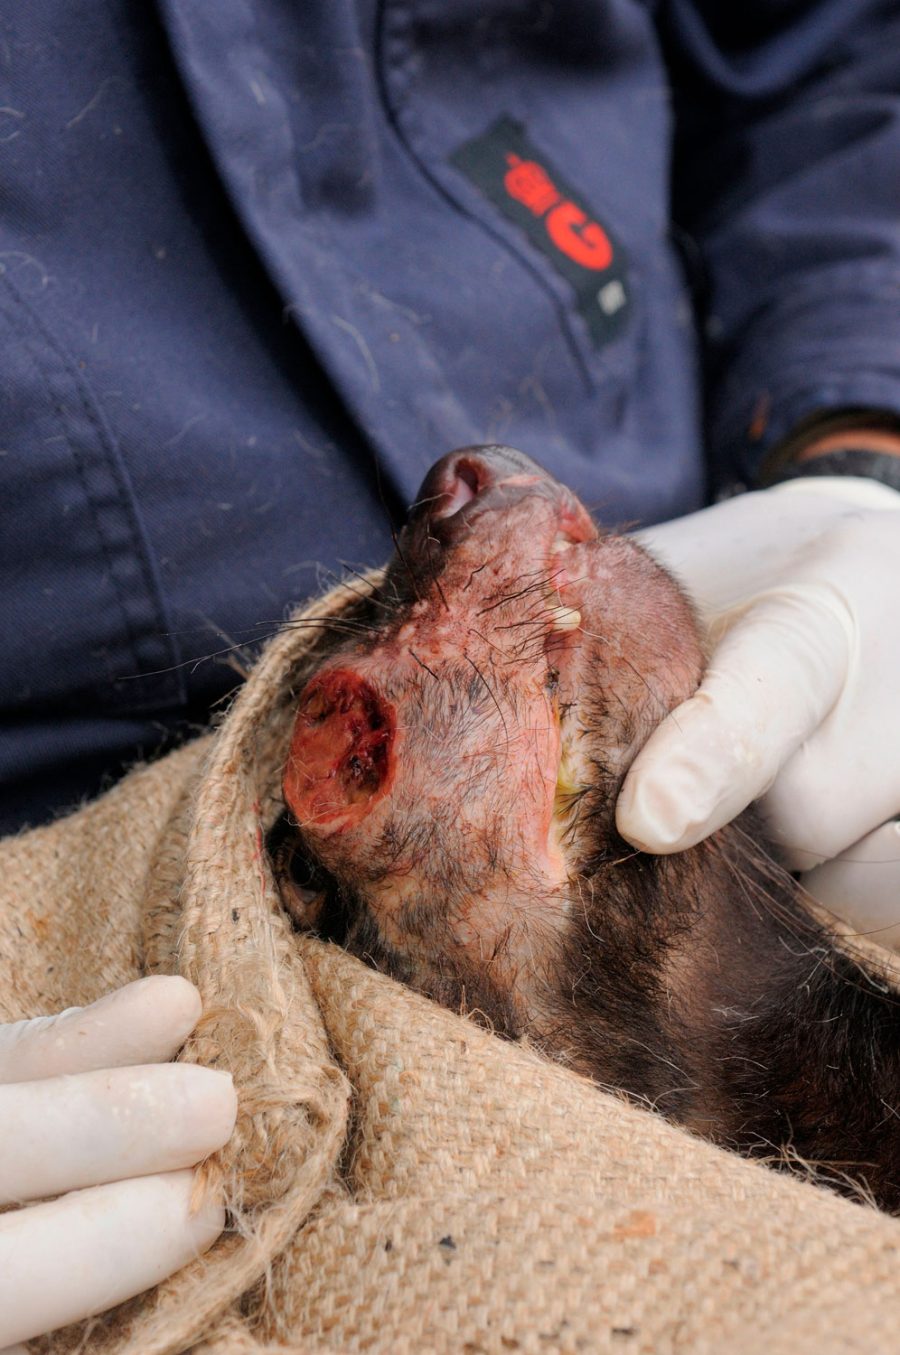 Tasmanian devil with a tumor on its face